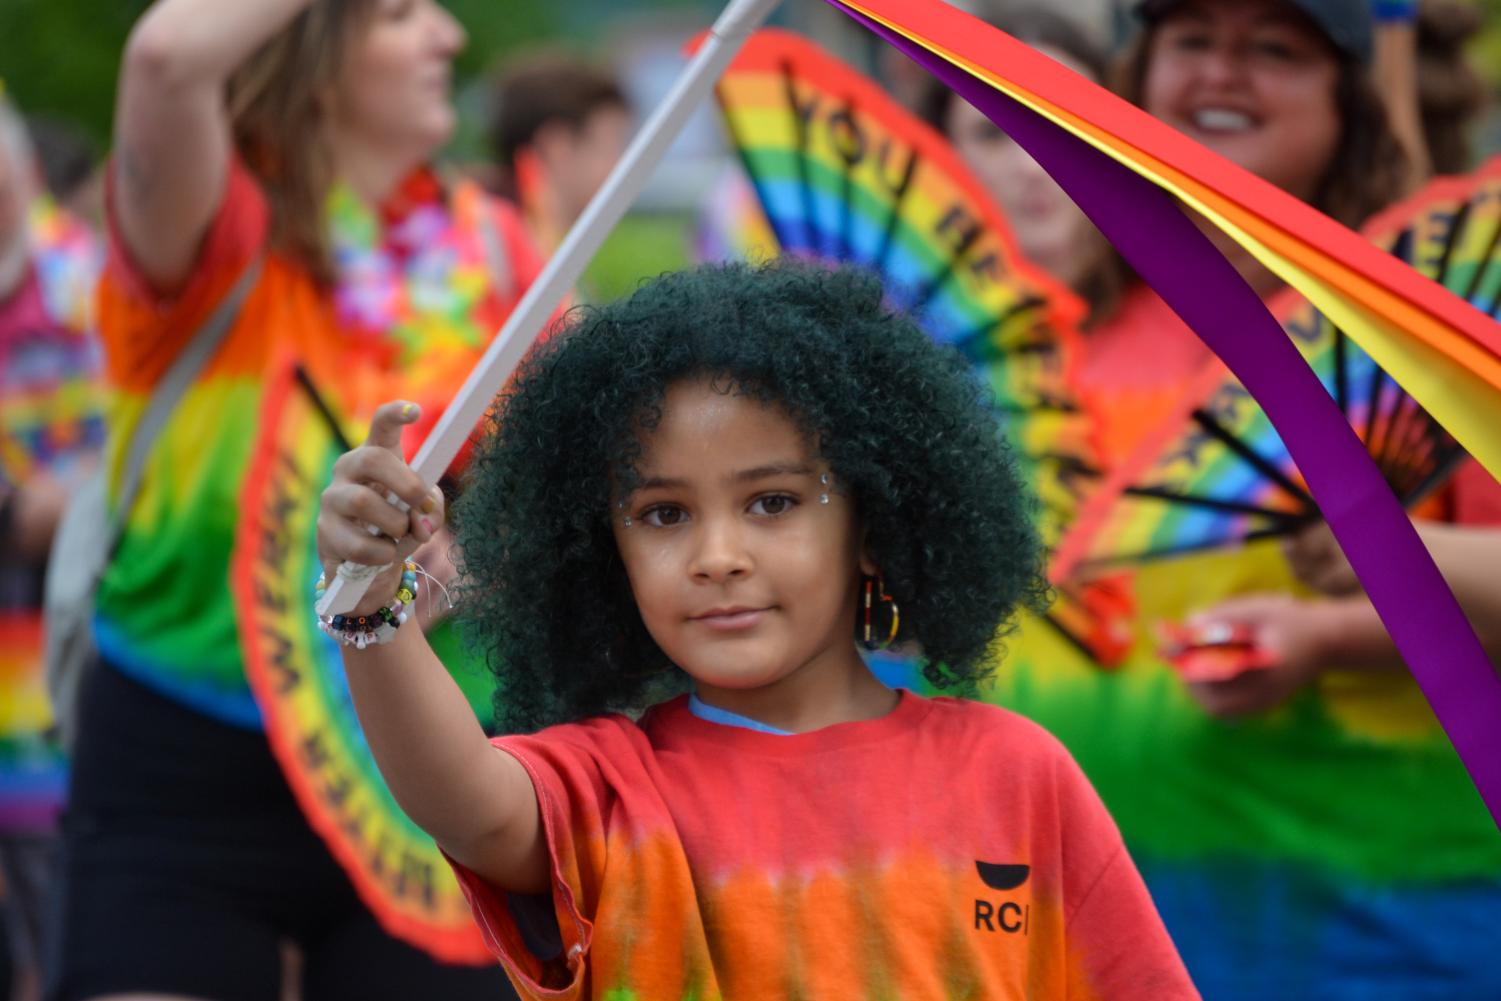 A child waves a colorful ribbon wand in the Indy Pride Parade. The Indy Pride Parade took place on Saturday, June 11, 2022.